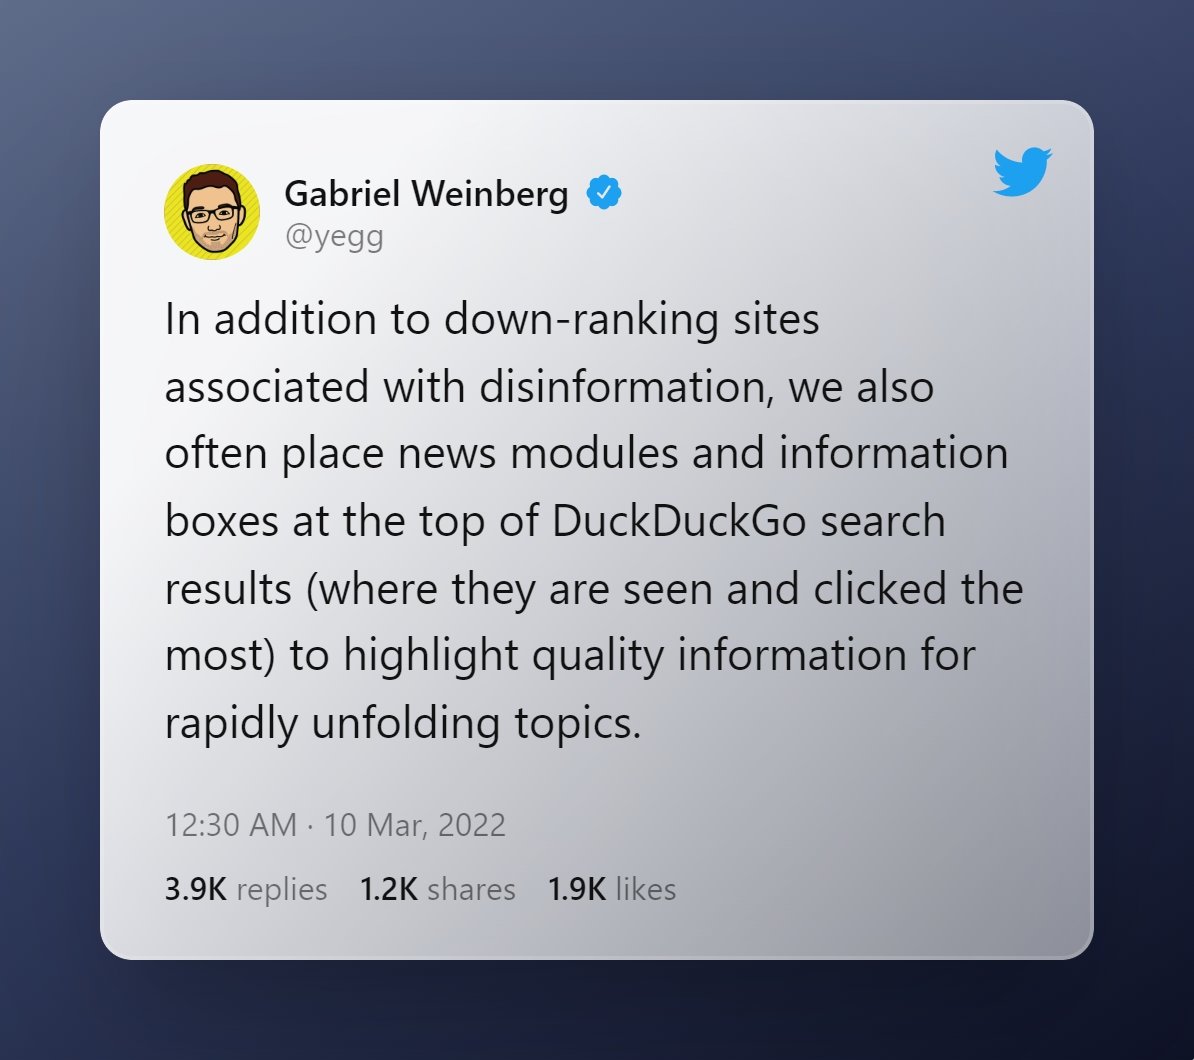 message from the CEO of DuckDuckGo